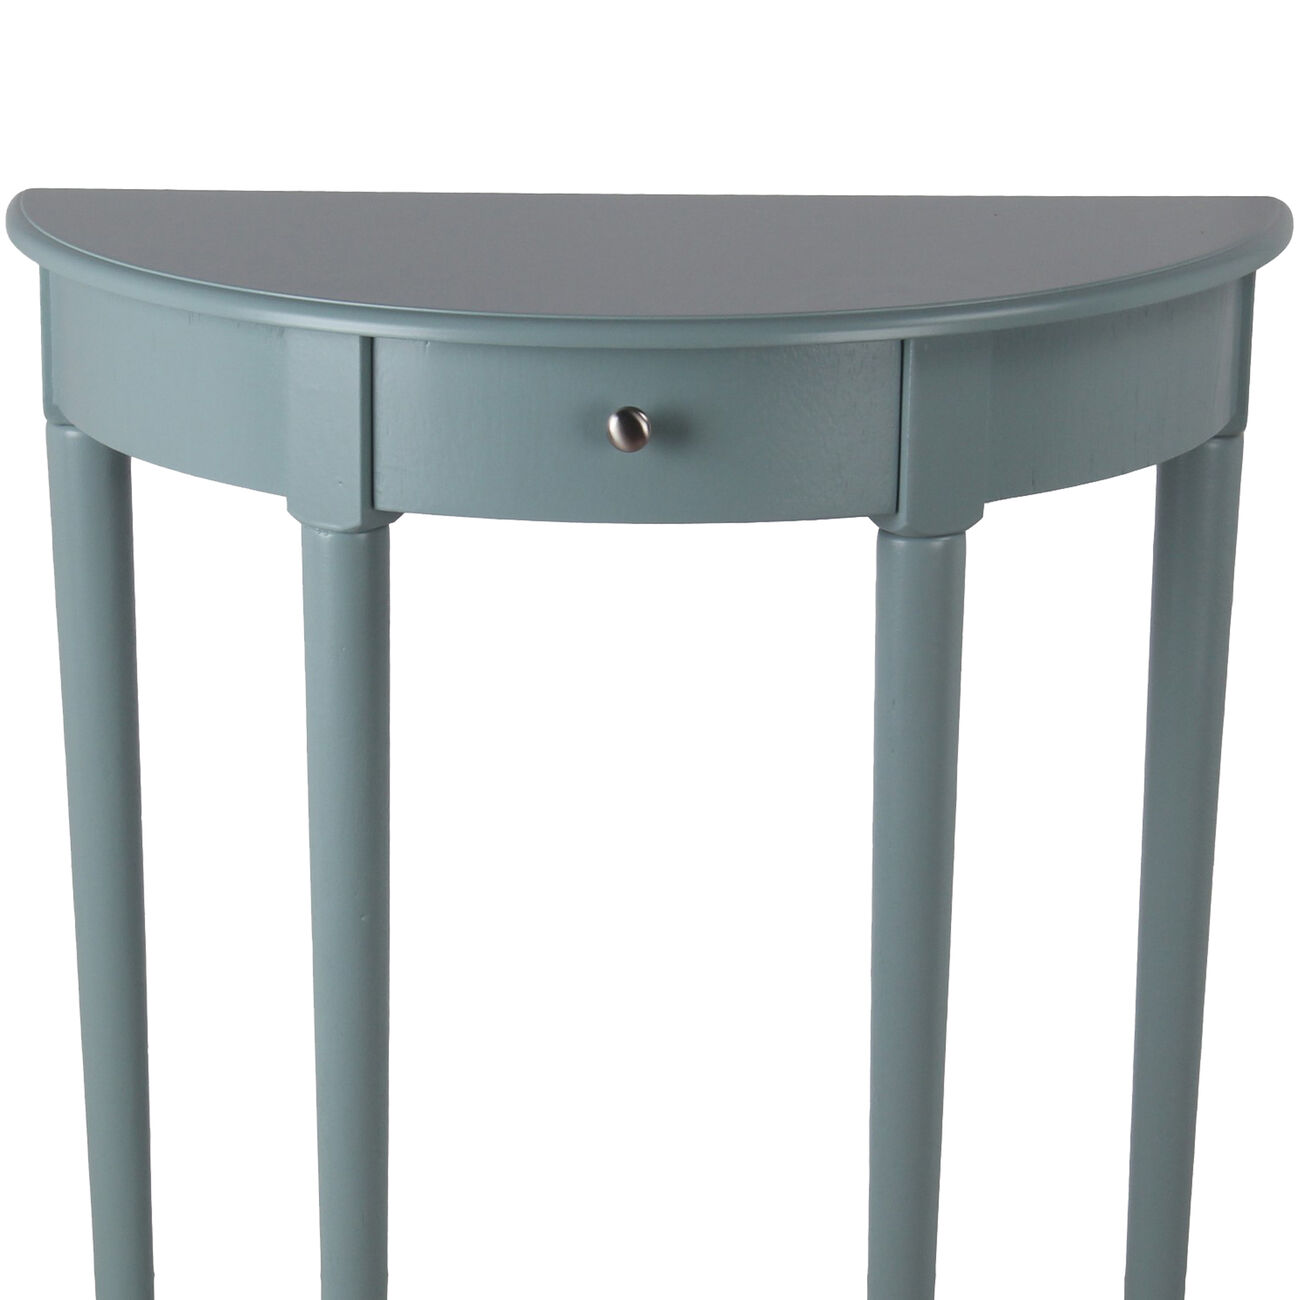 1 Drawer Half Moon Console Table with Round Legs, Small, Sage Blue